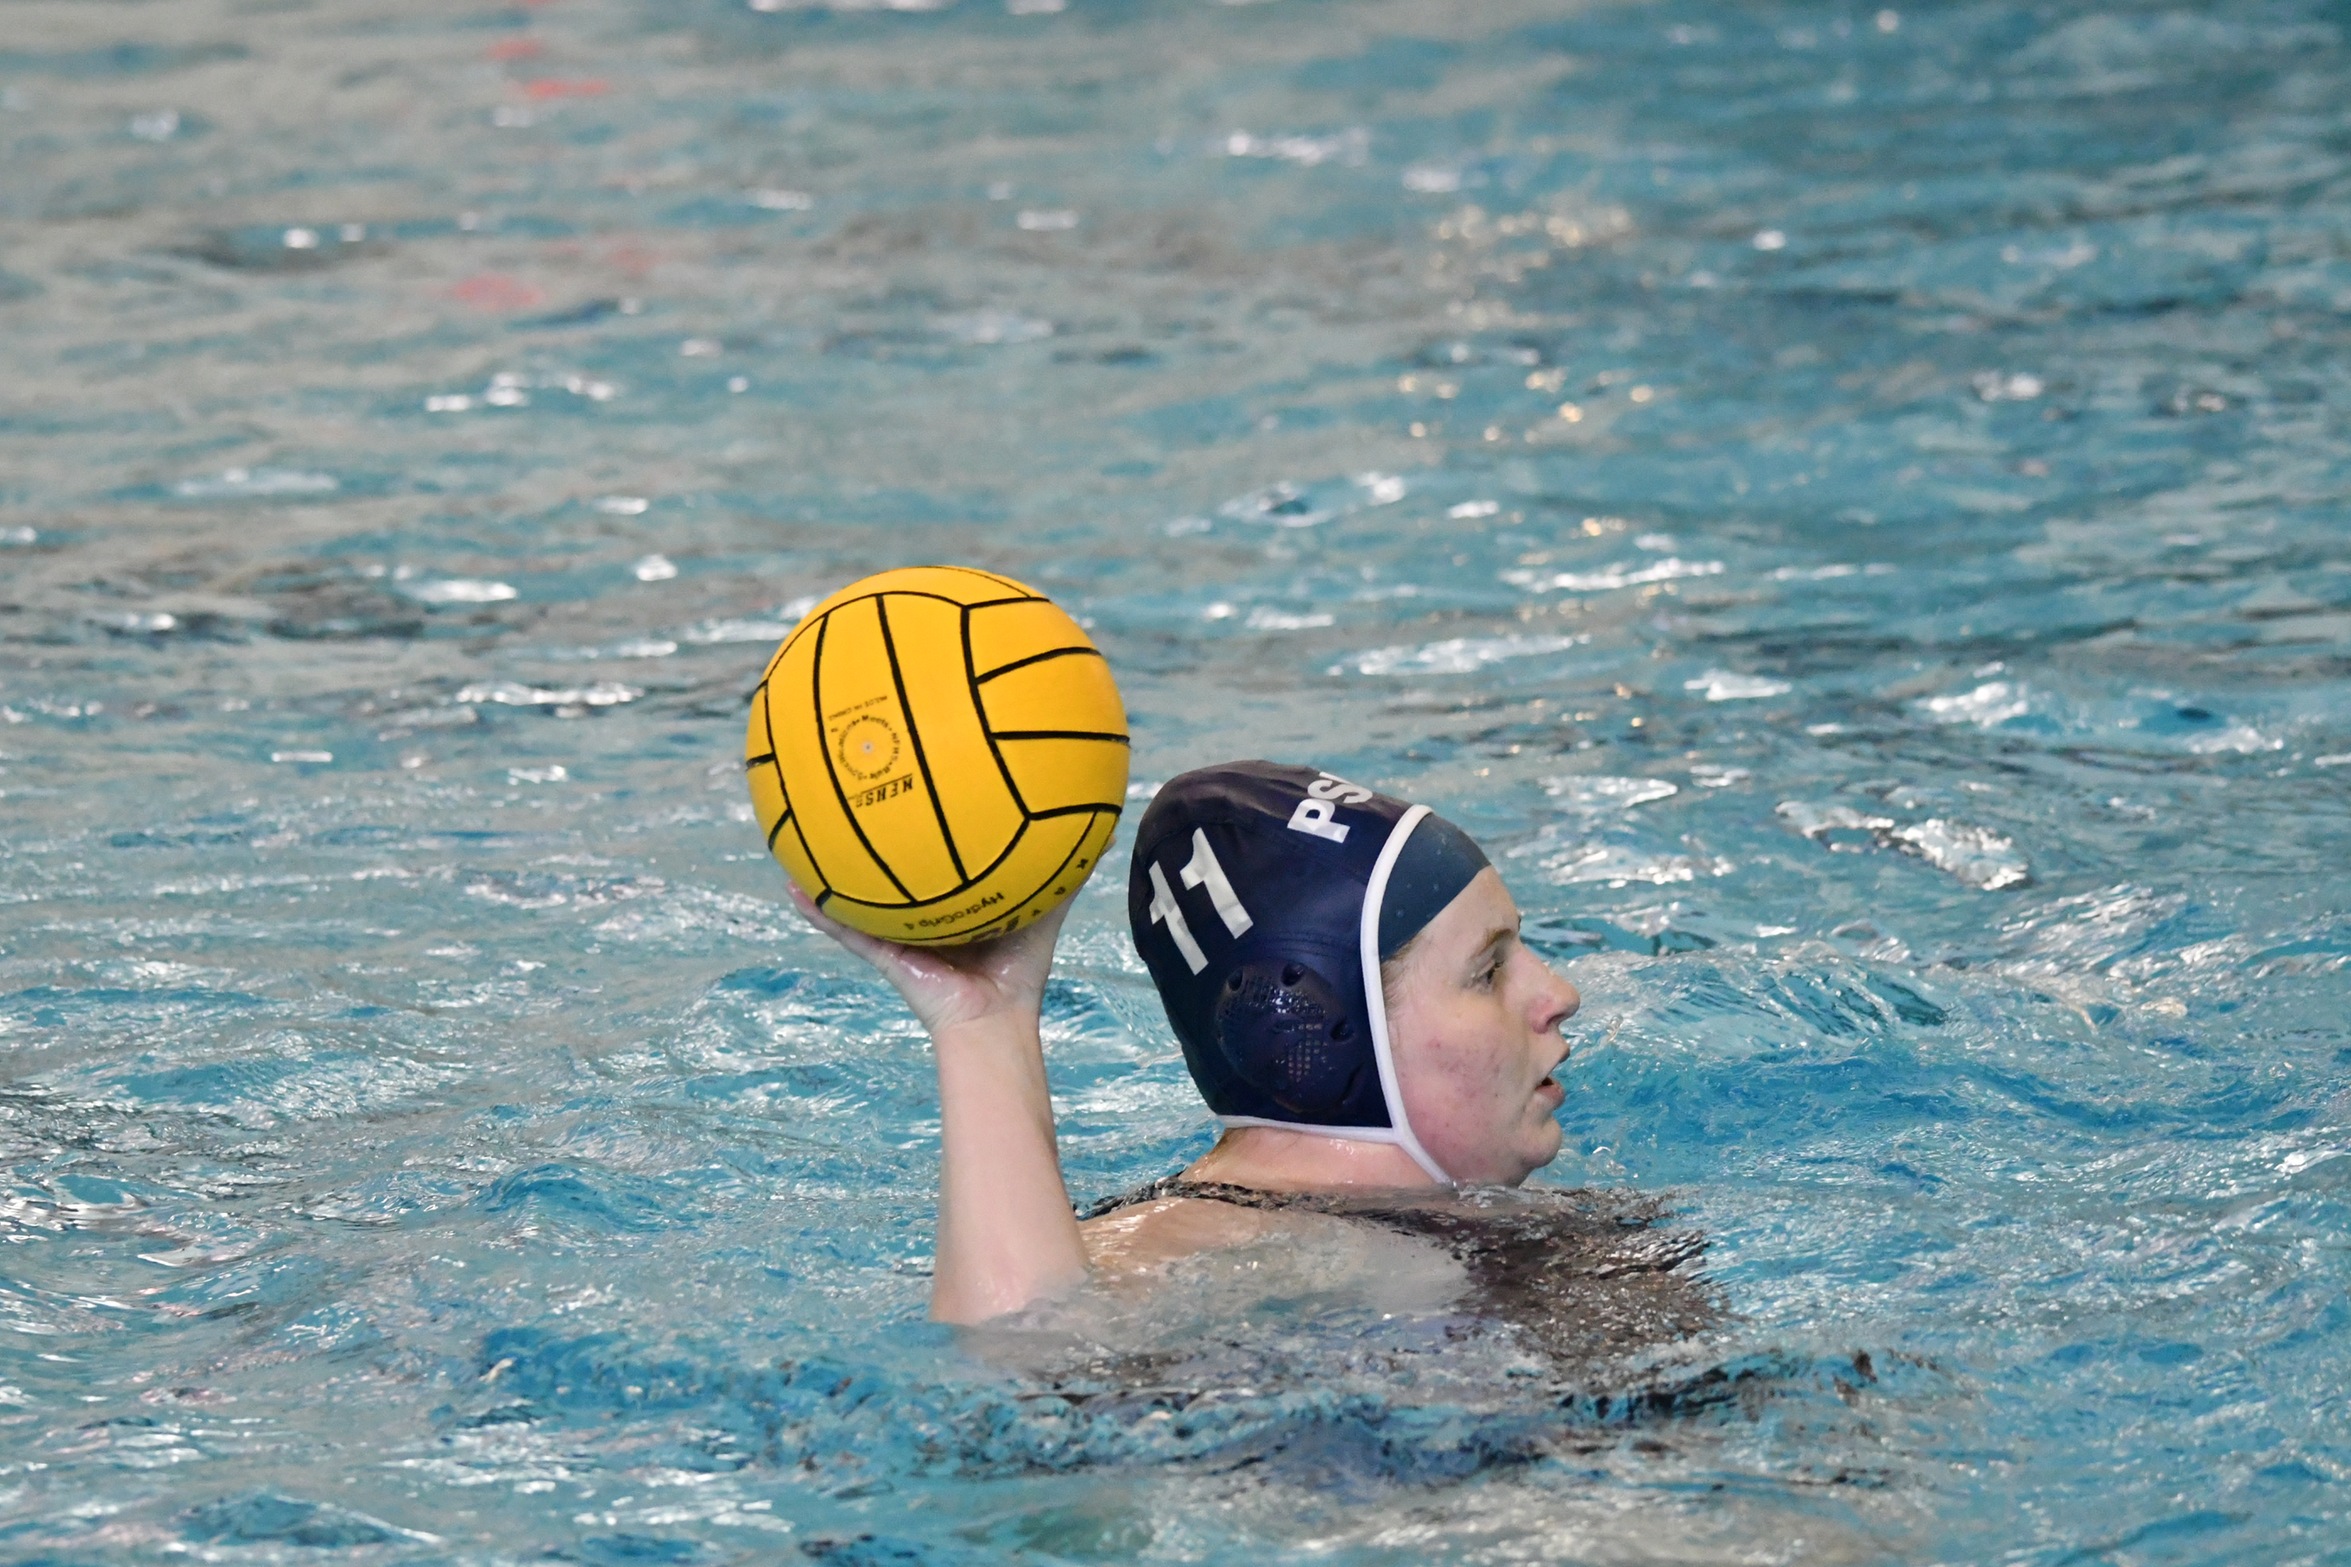 Women's Water Polo Splits on Final Day of CWPA Action